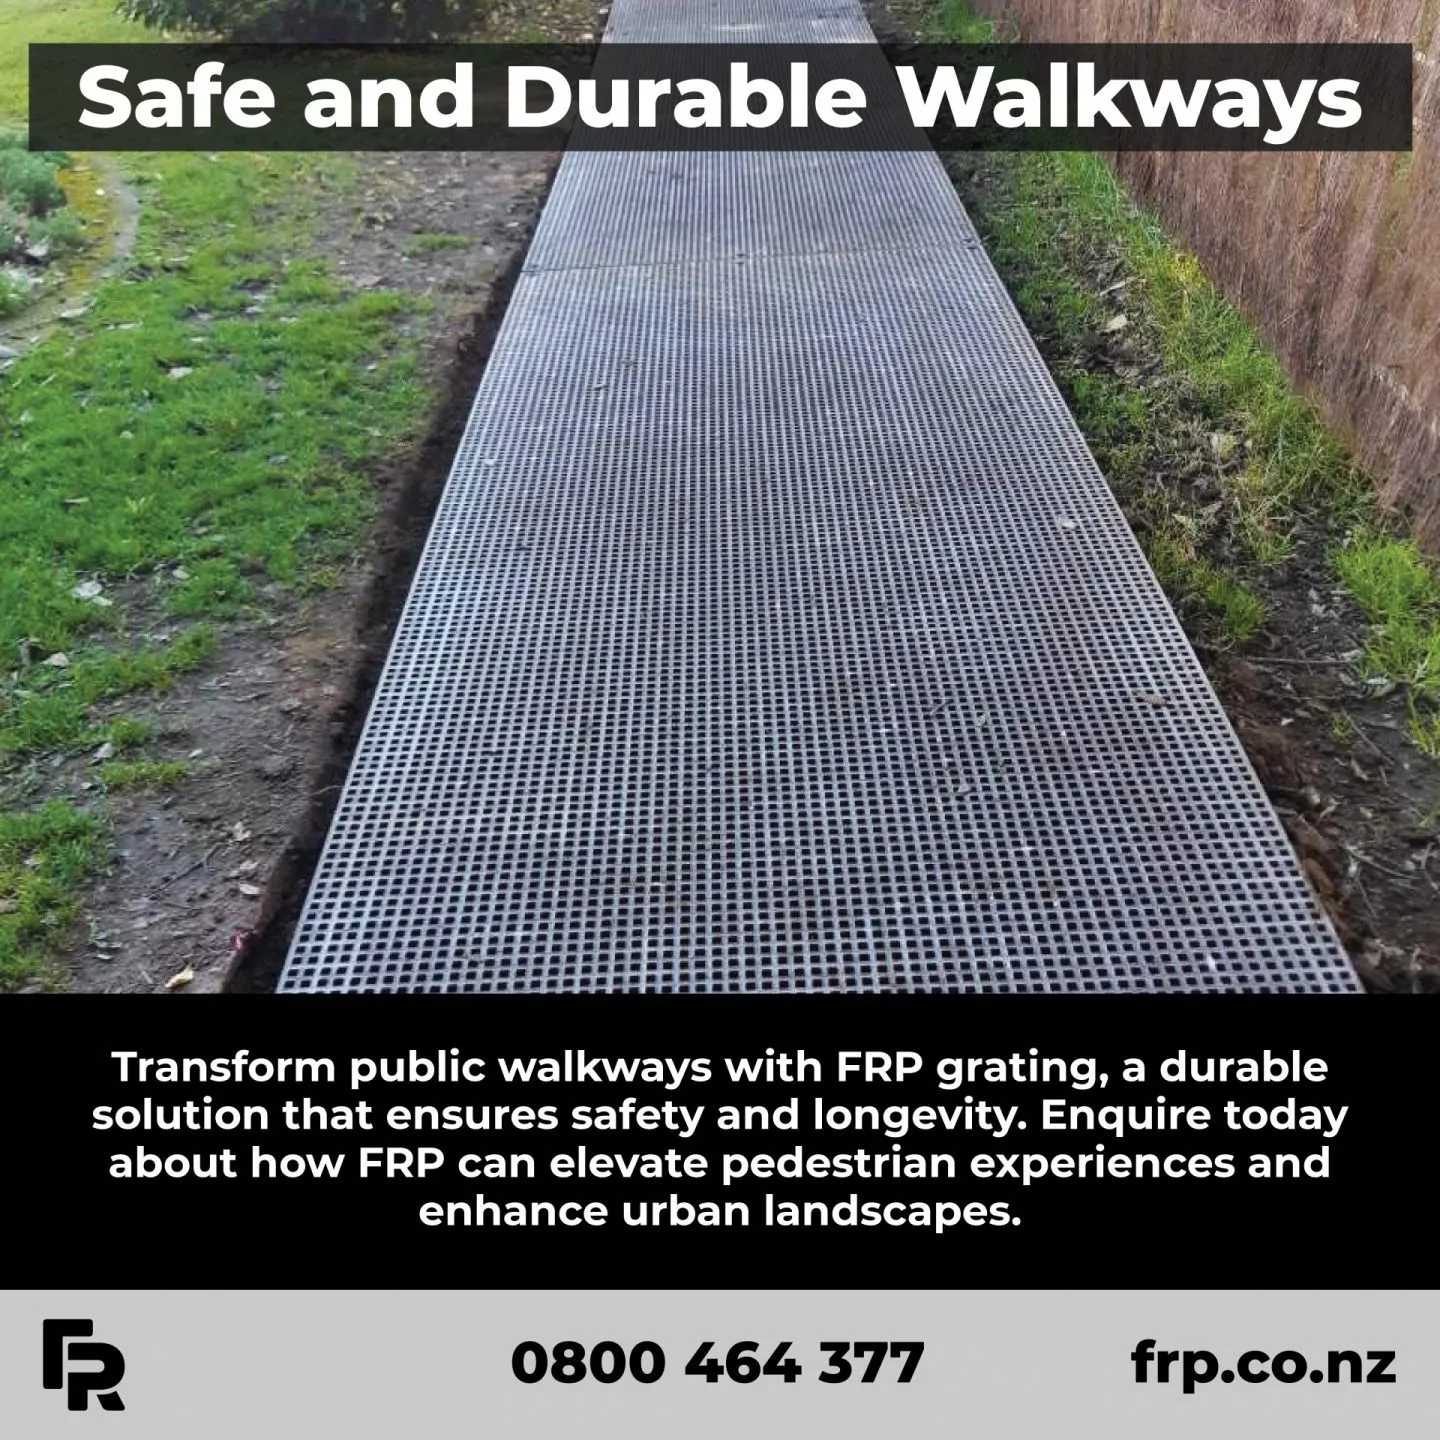 Enquire today!

#frp #frpproducts #commercial #landscaping #landscapedesign #nzarchitects #walkways